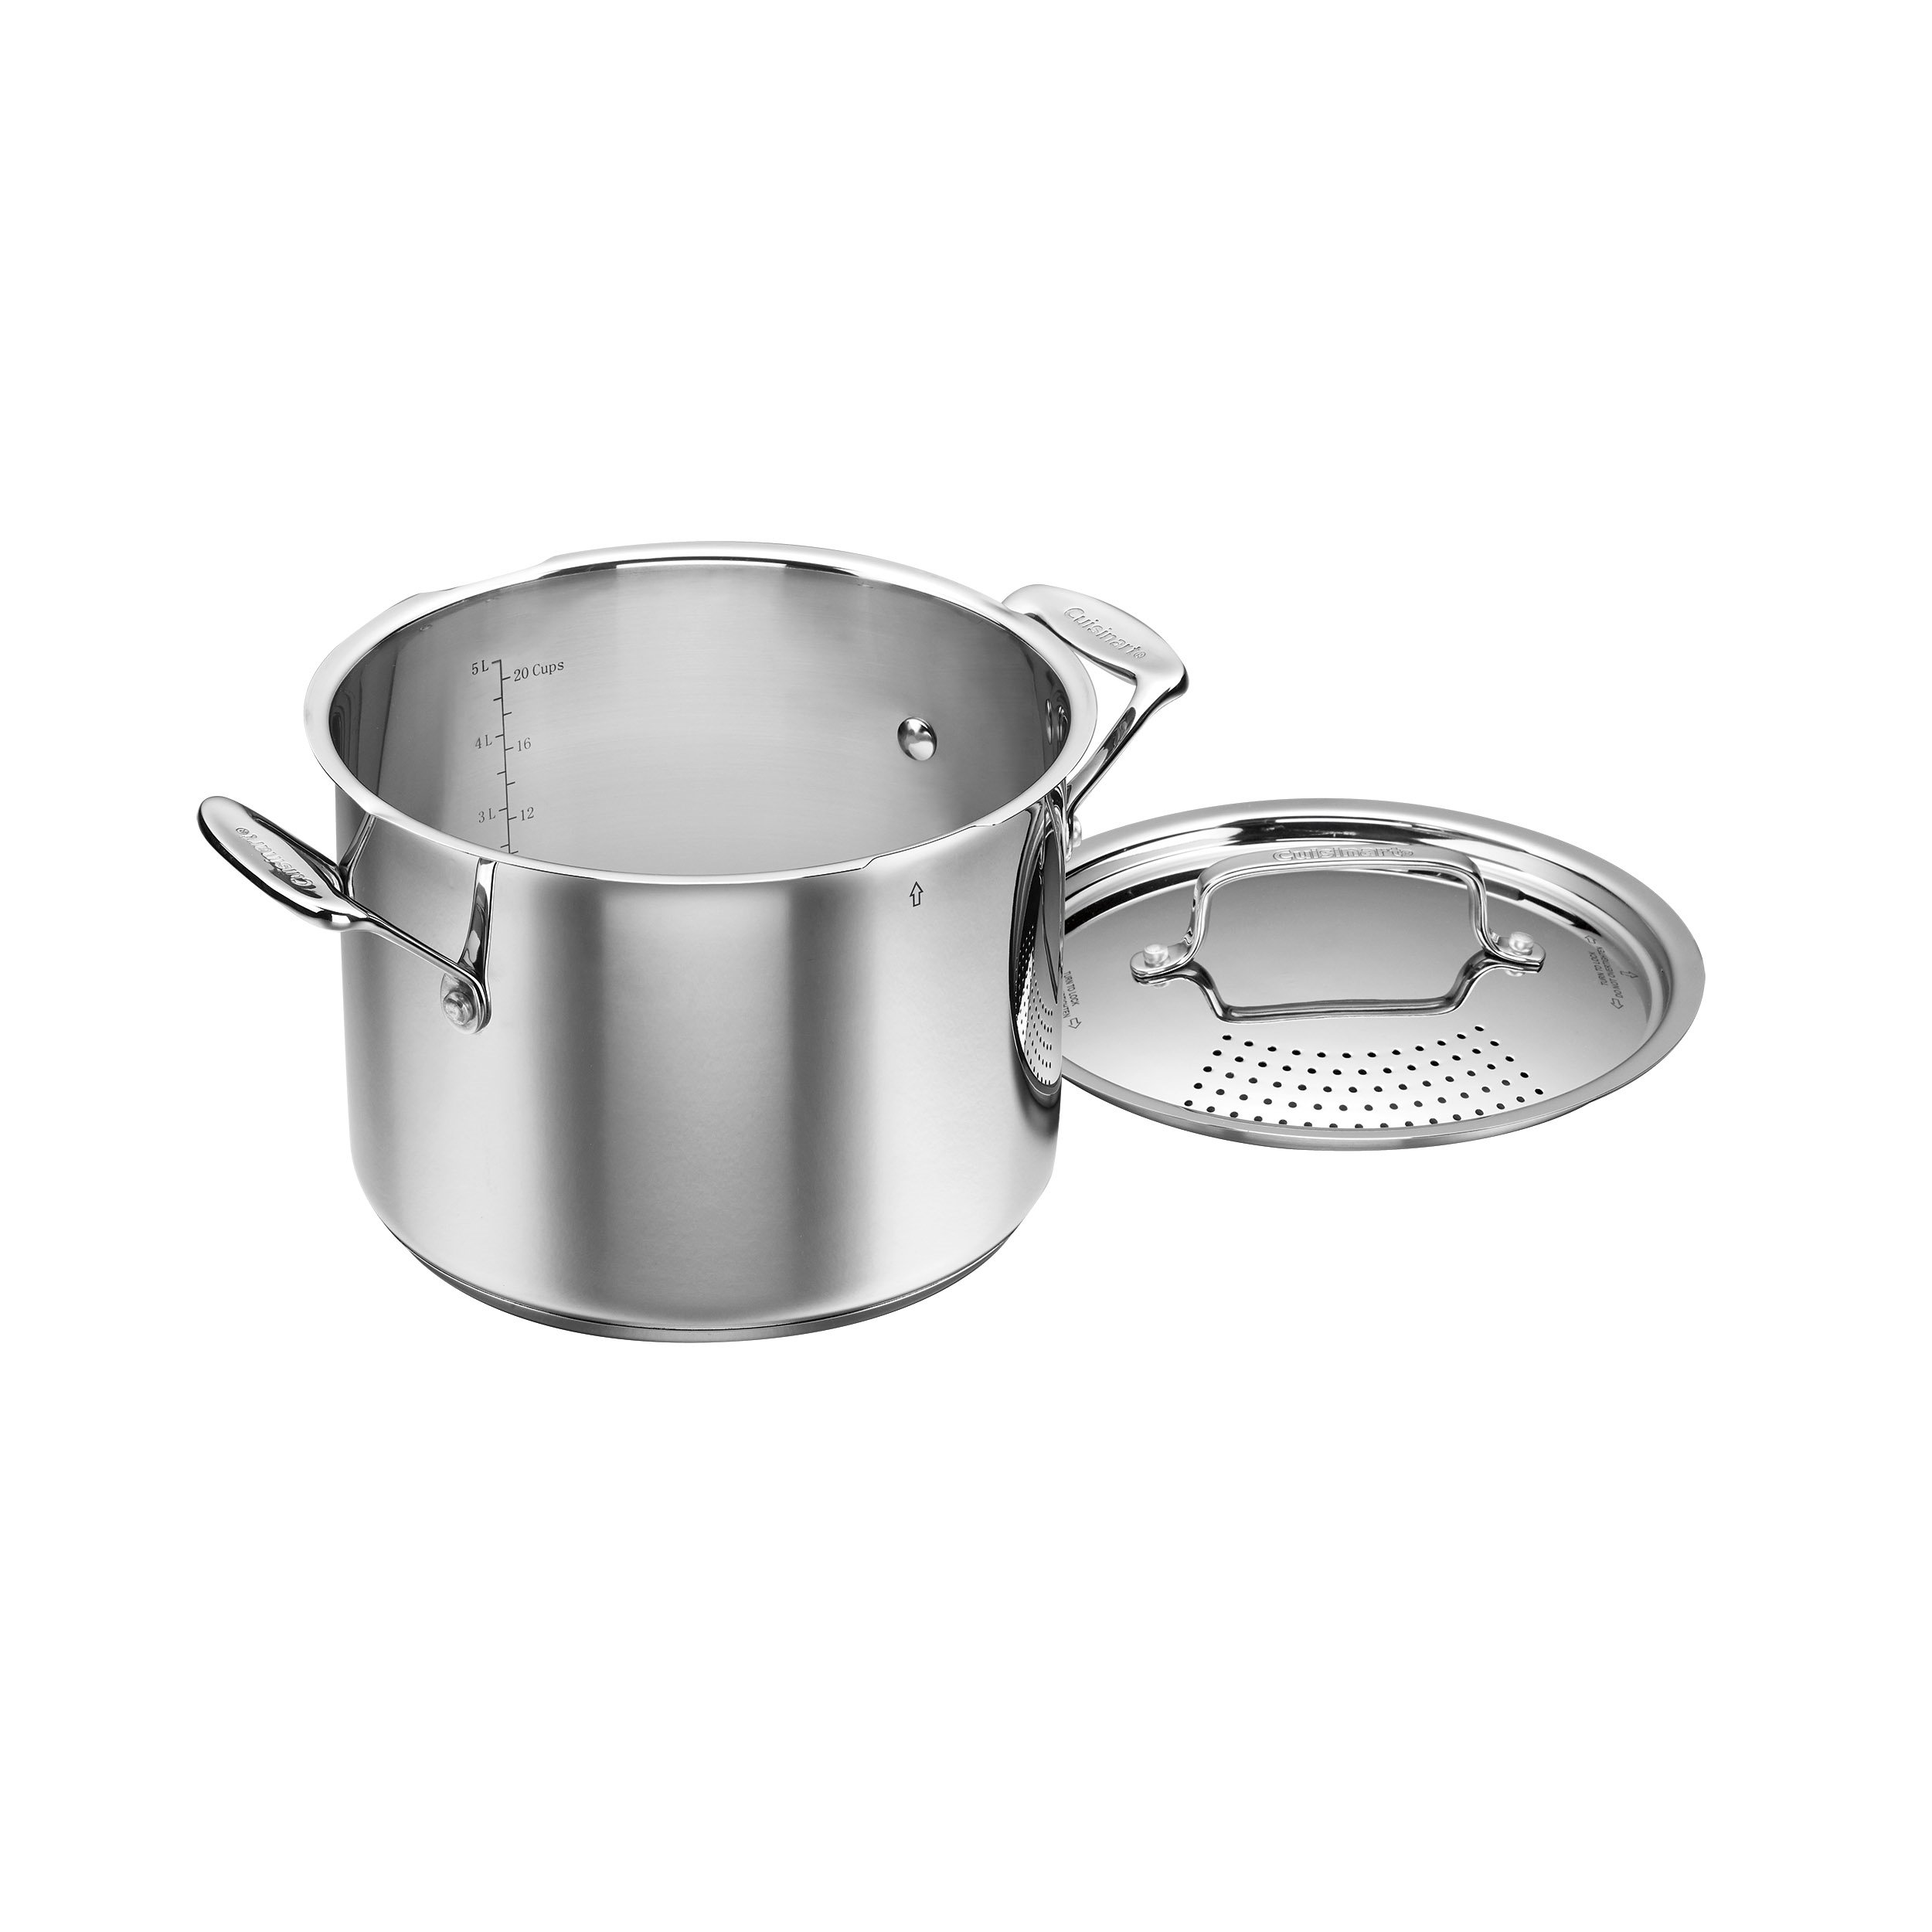 Chef's Classic™ 6 Quart Stockpot with Straining Cover